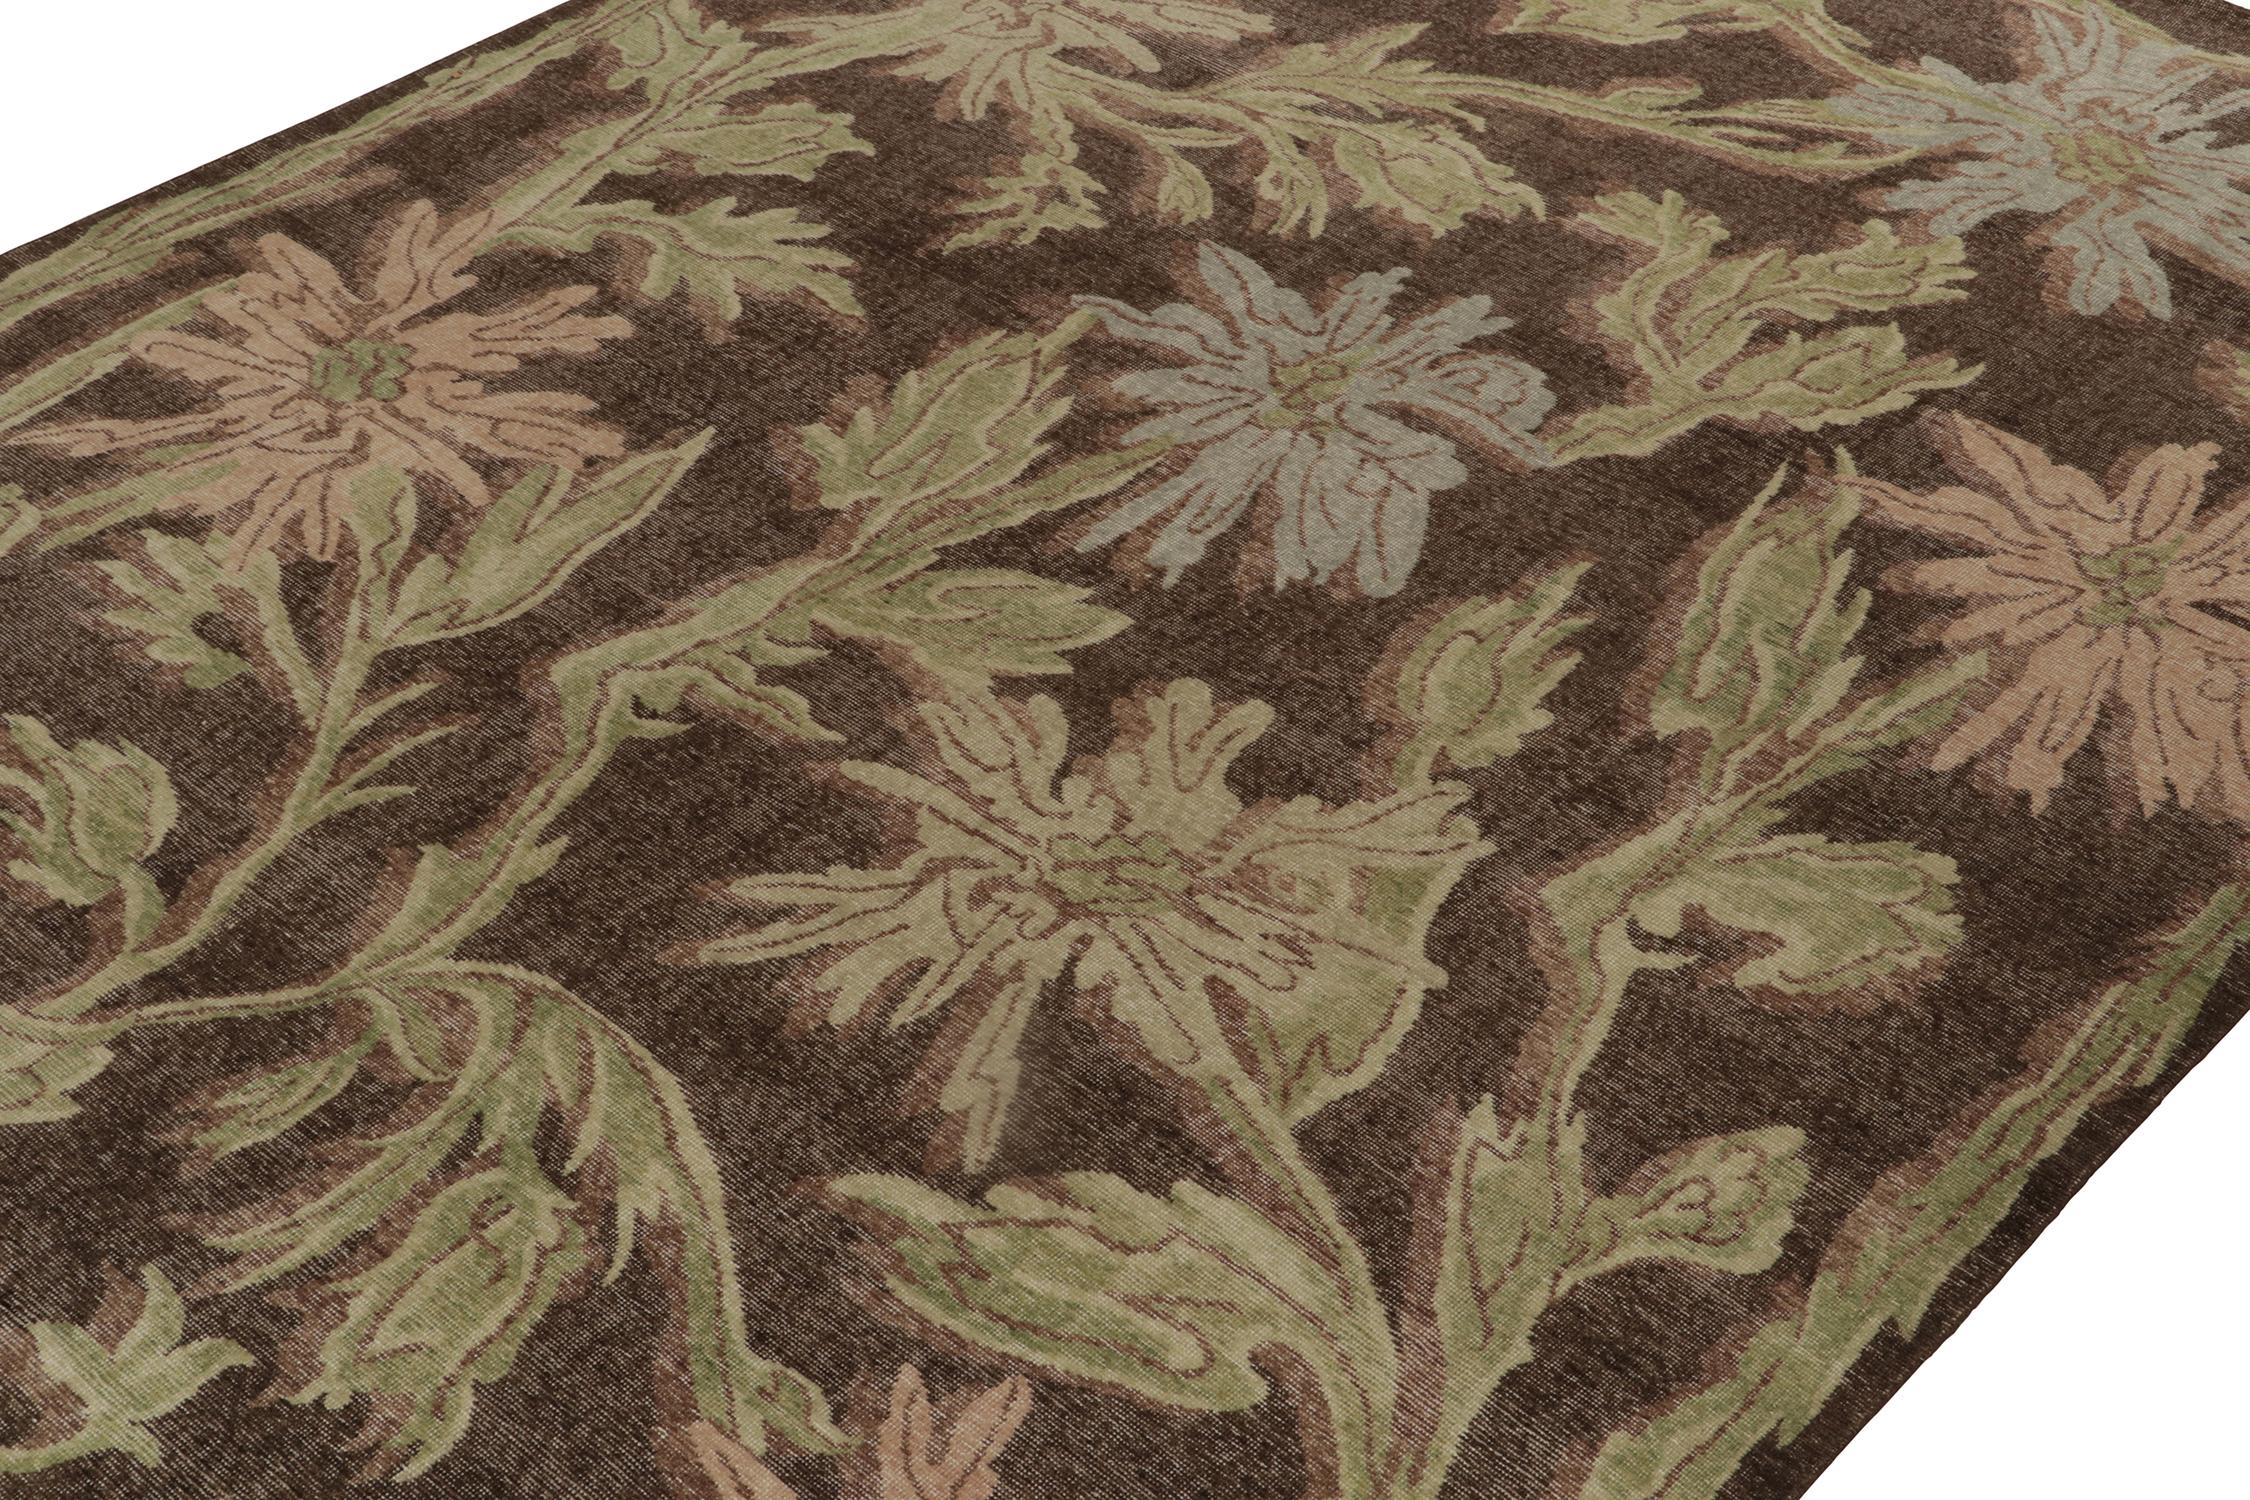 Indian Rug & Kilim’s Distressed Style Rug in Brown and Green Floral Patterns For Sale